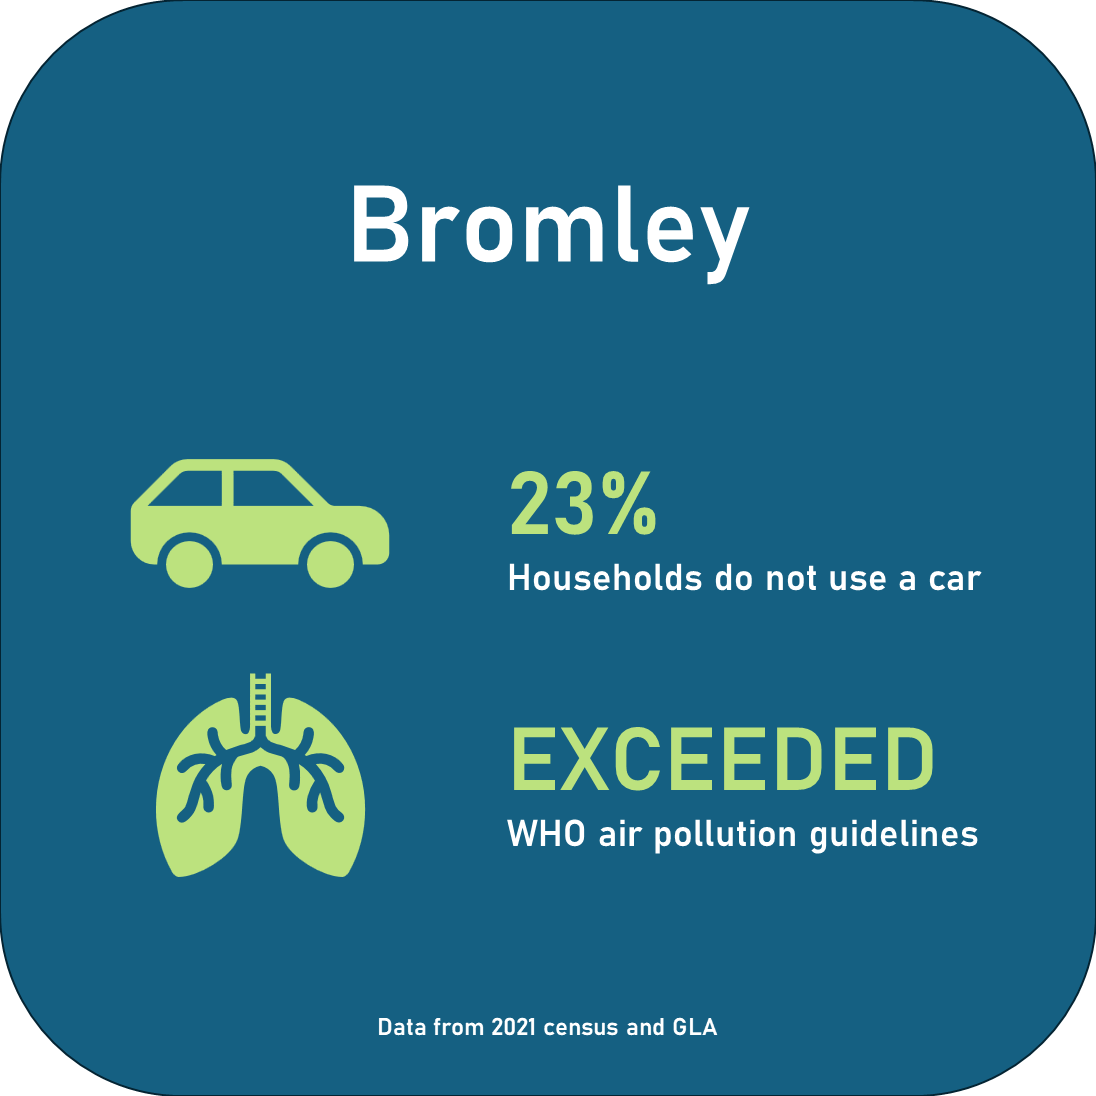 23% households do not use a car. Exceeded WHO air pollution guidelines.